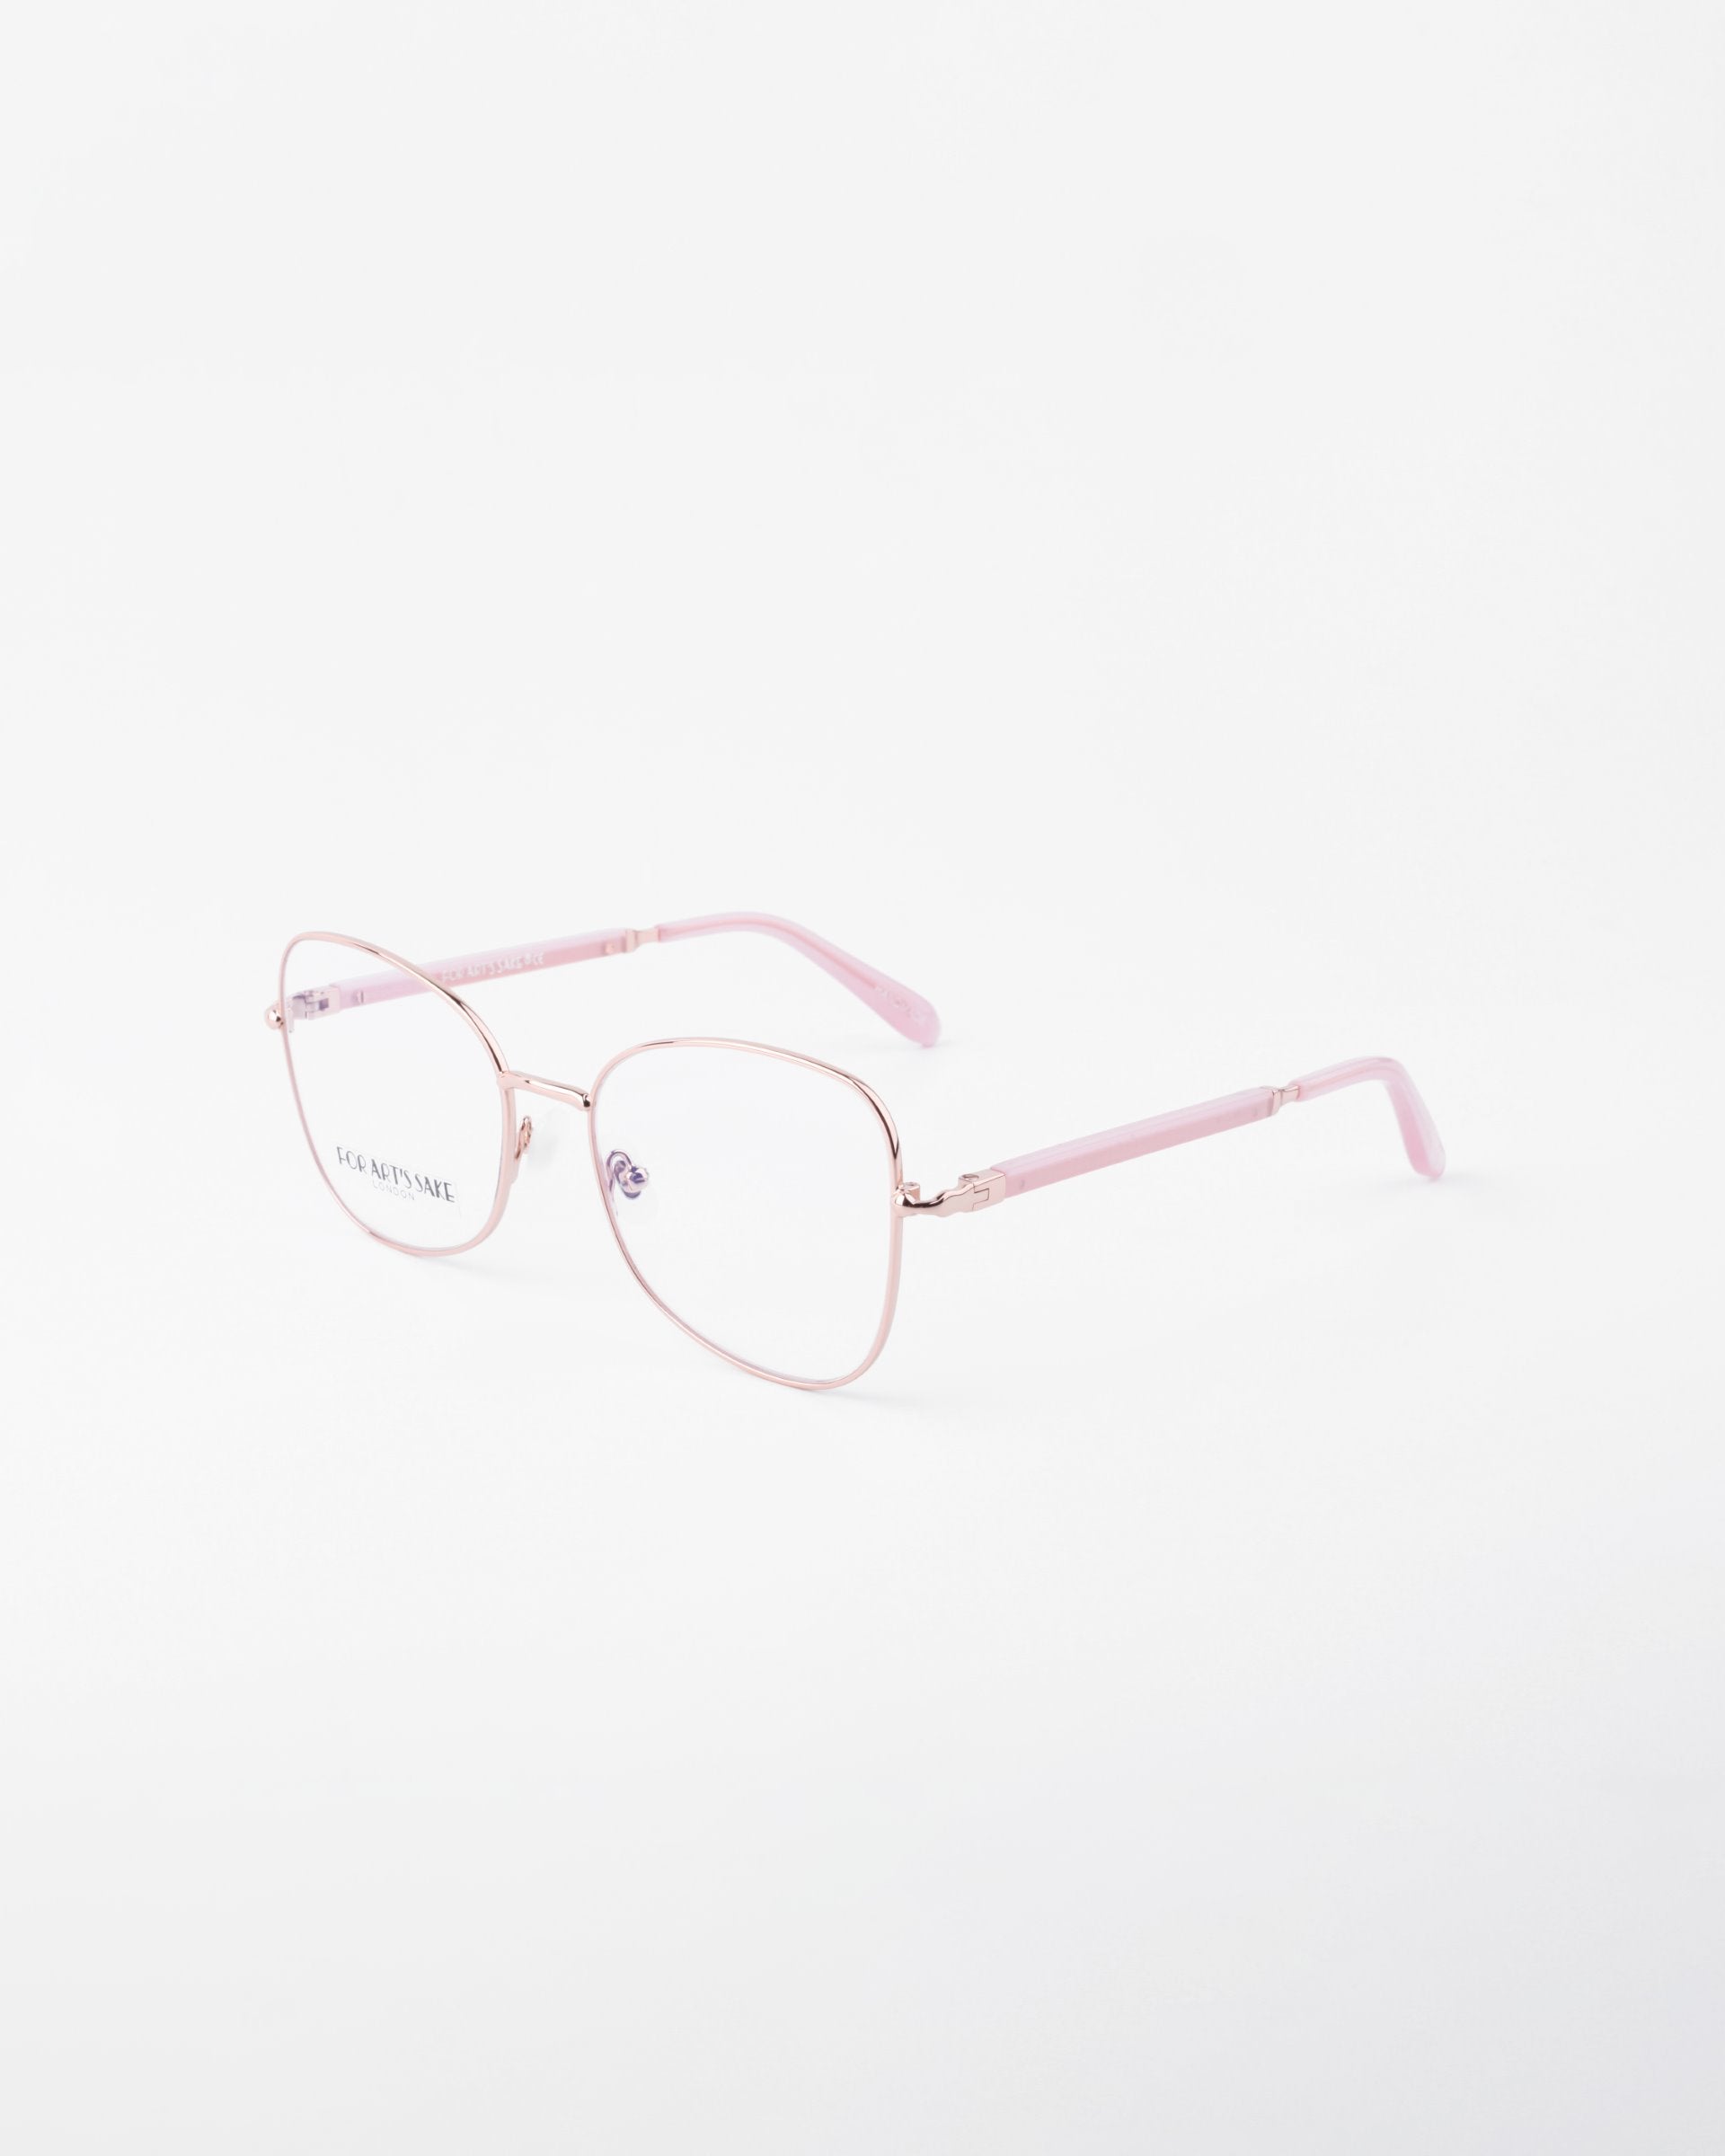 A pair of pink, metal-framed For Art&#39;s Sake® Grace prescription glasses with slightly oversized, rectangular lenses on a white background. The temples and temple tips are also pink, featuring clear nose pads and an 18-karat gold-plated brand logo visible on the left lens.